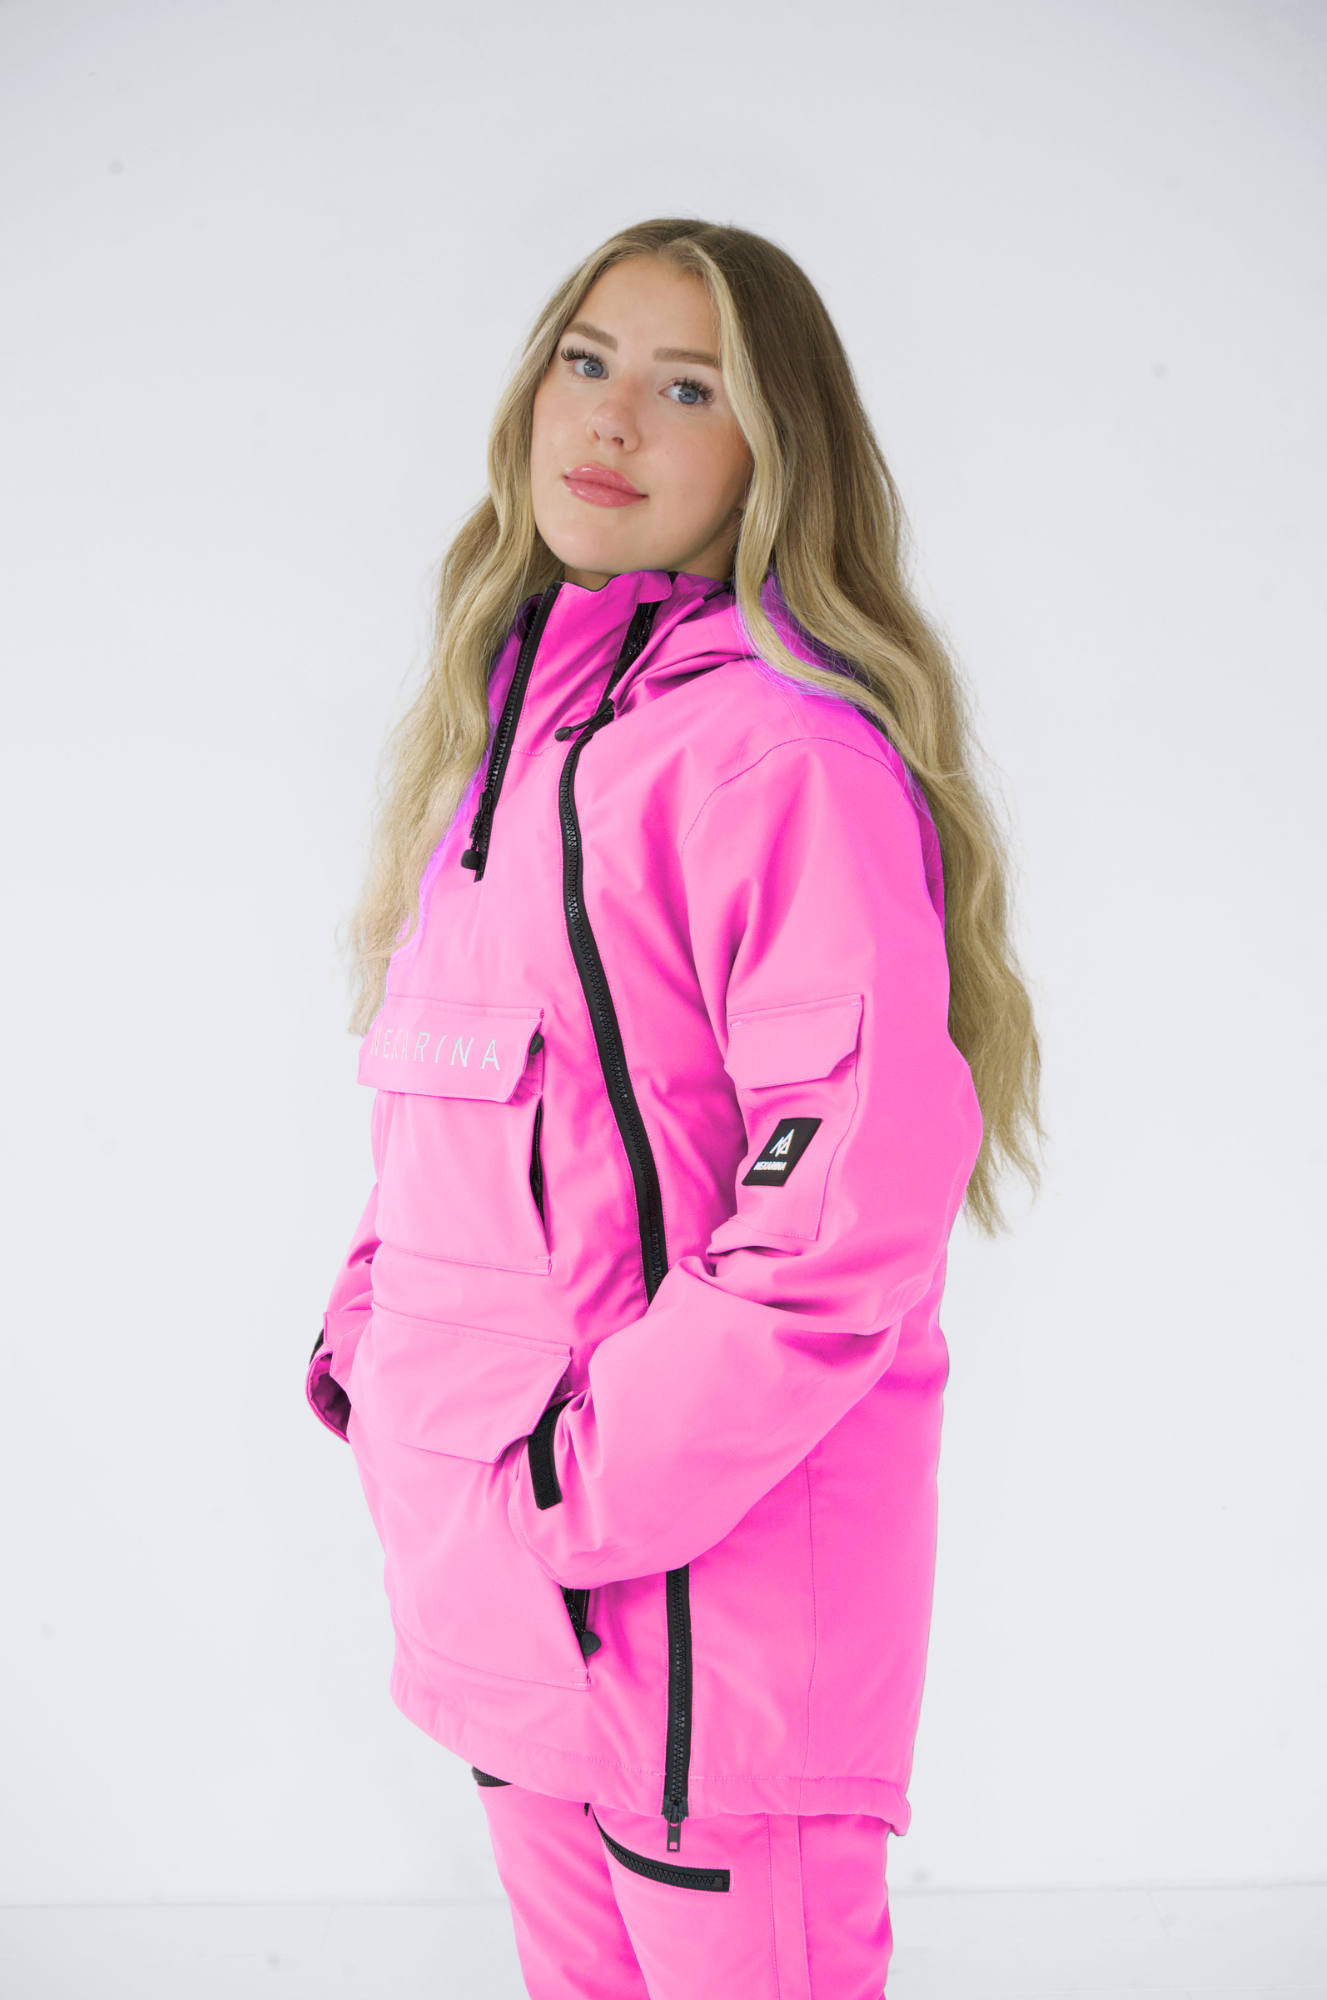 Side profile of a woman in a pink Nexarina snowboard jacket, posed against a white backdrop